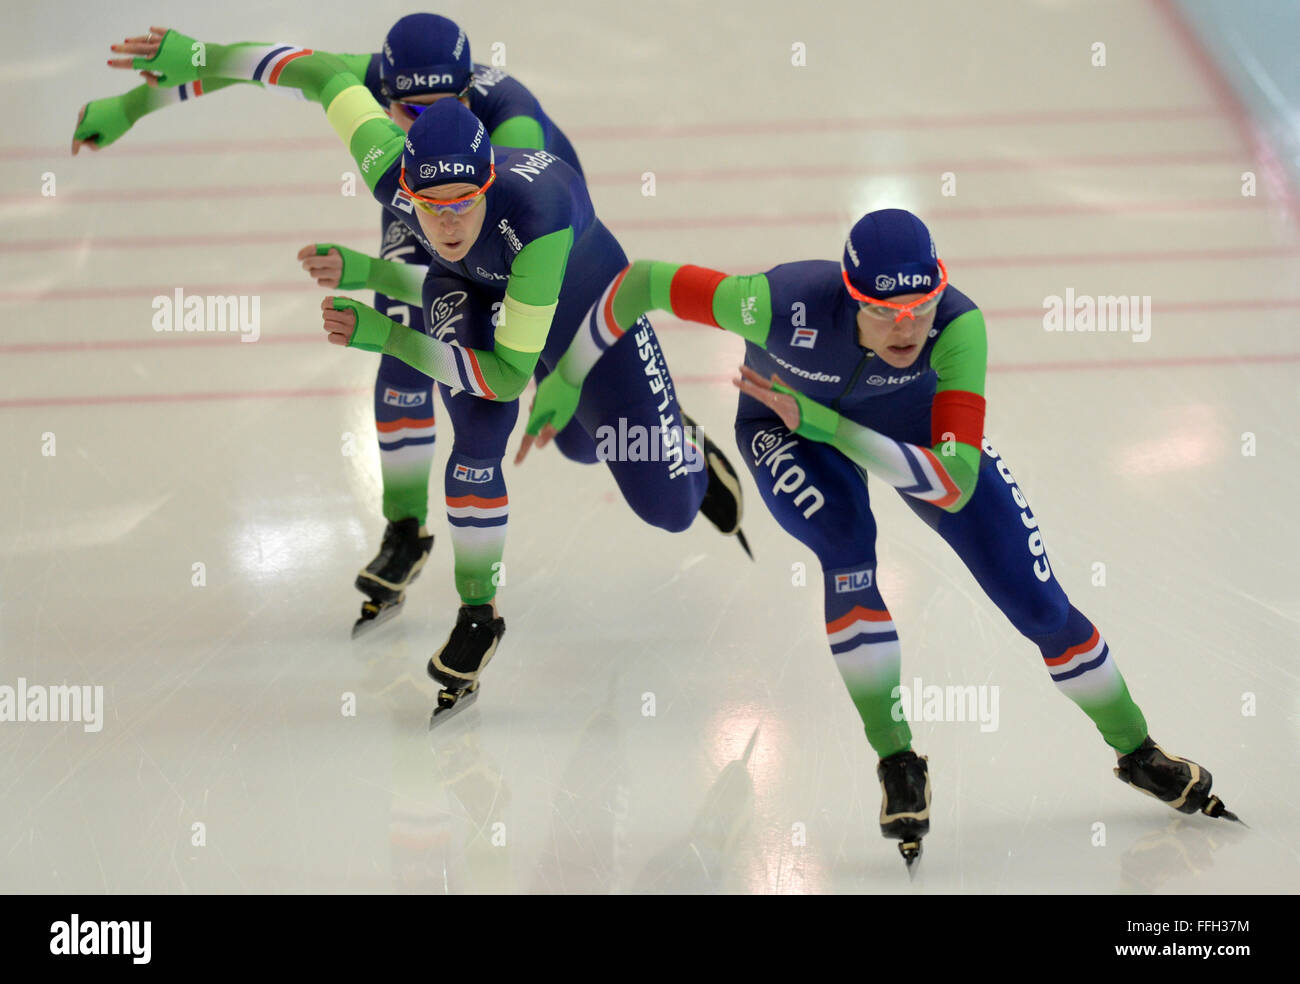 Kolomna, Russia. 13th Feb, 2016. Team members of the Netherlands compete during the ladies team pursuit event at ISU world single distances speed skating championships in Kolomna, Russia, on Feb. 13, 2016. The Netherlands claimed the champion. Credit:  Pavel Bednyakov/Xinhua/Alamy Live News Stock Photo